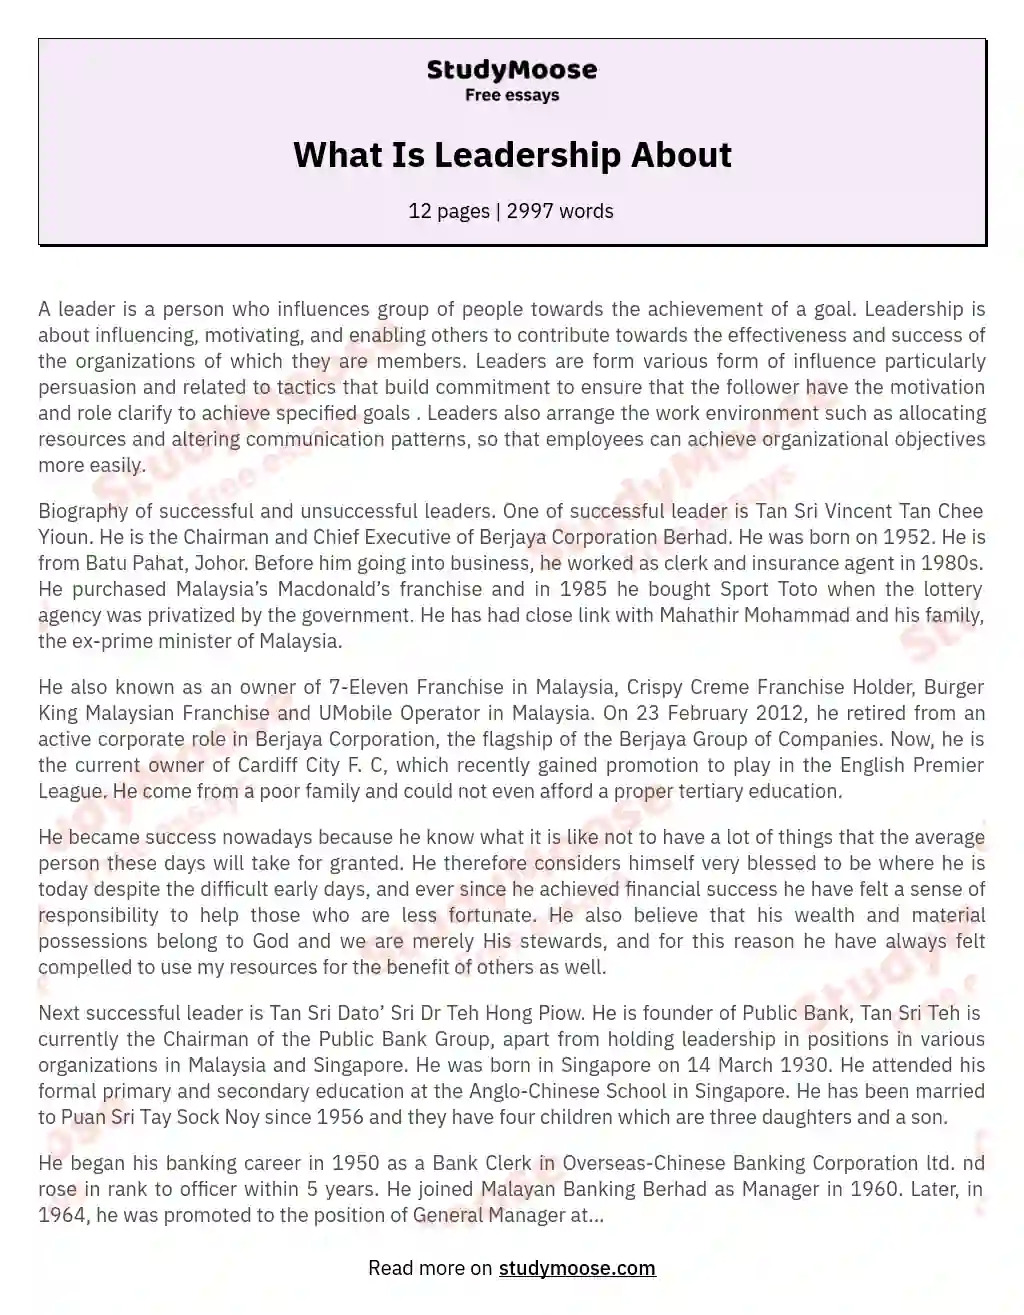 What Is Leadership About essay